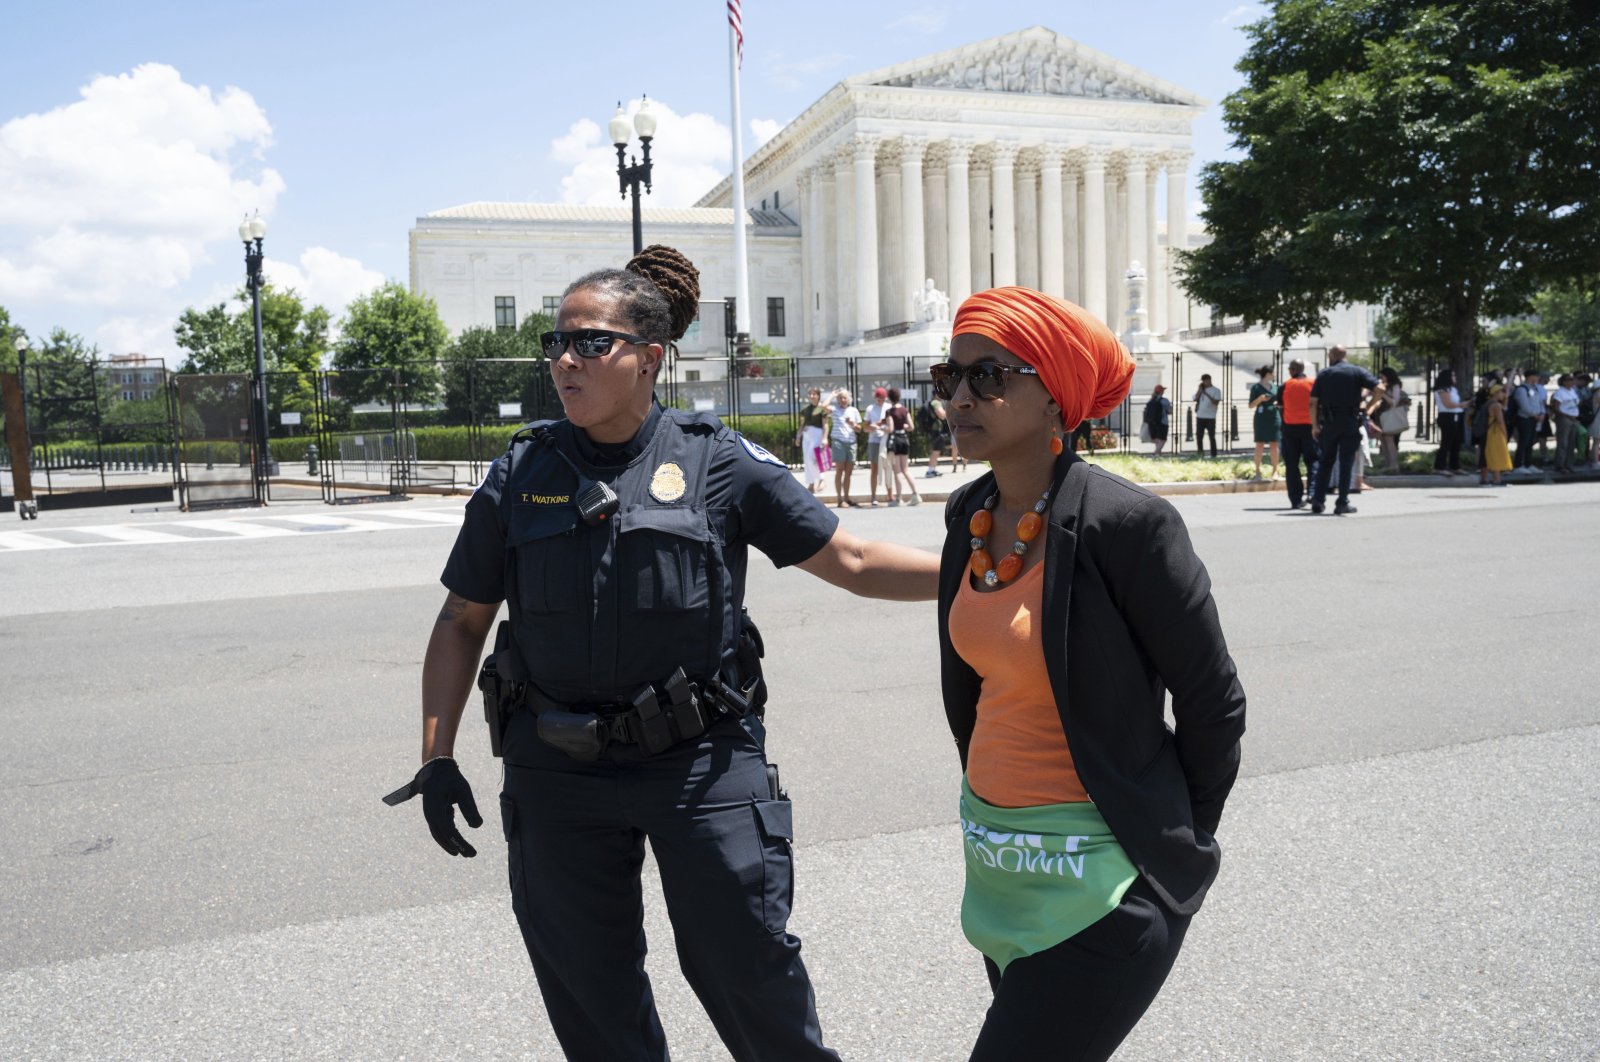 U.S. Rep. Ilhan Omar is arrested at an abortion rights civil disobedience action organized by the Center for Popular Democracy Action, Washington, U.S., July 19, 2022. (AP Photo)